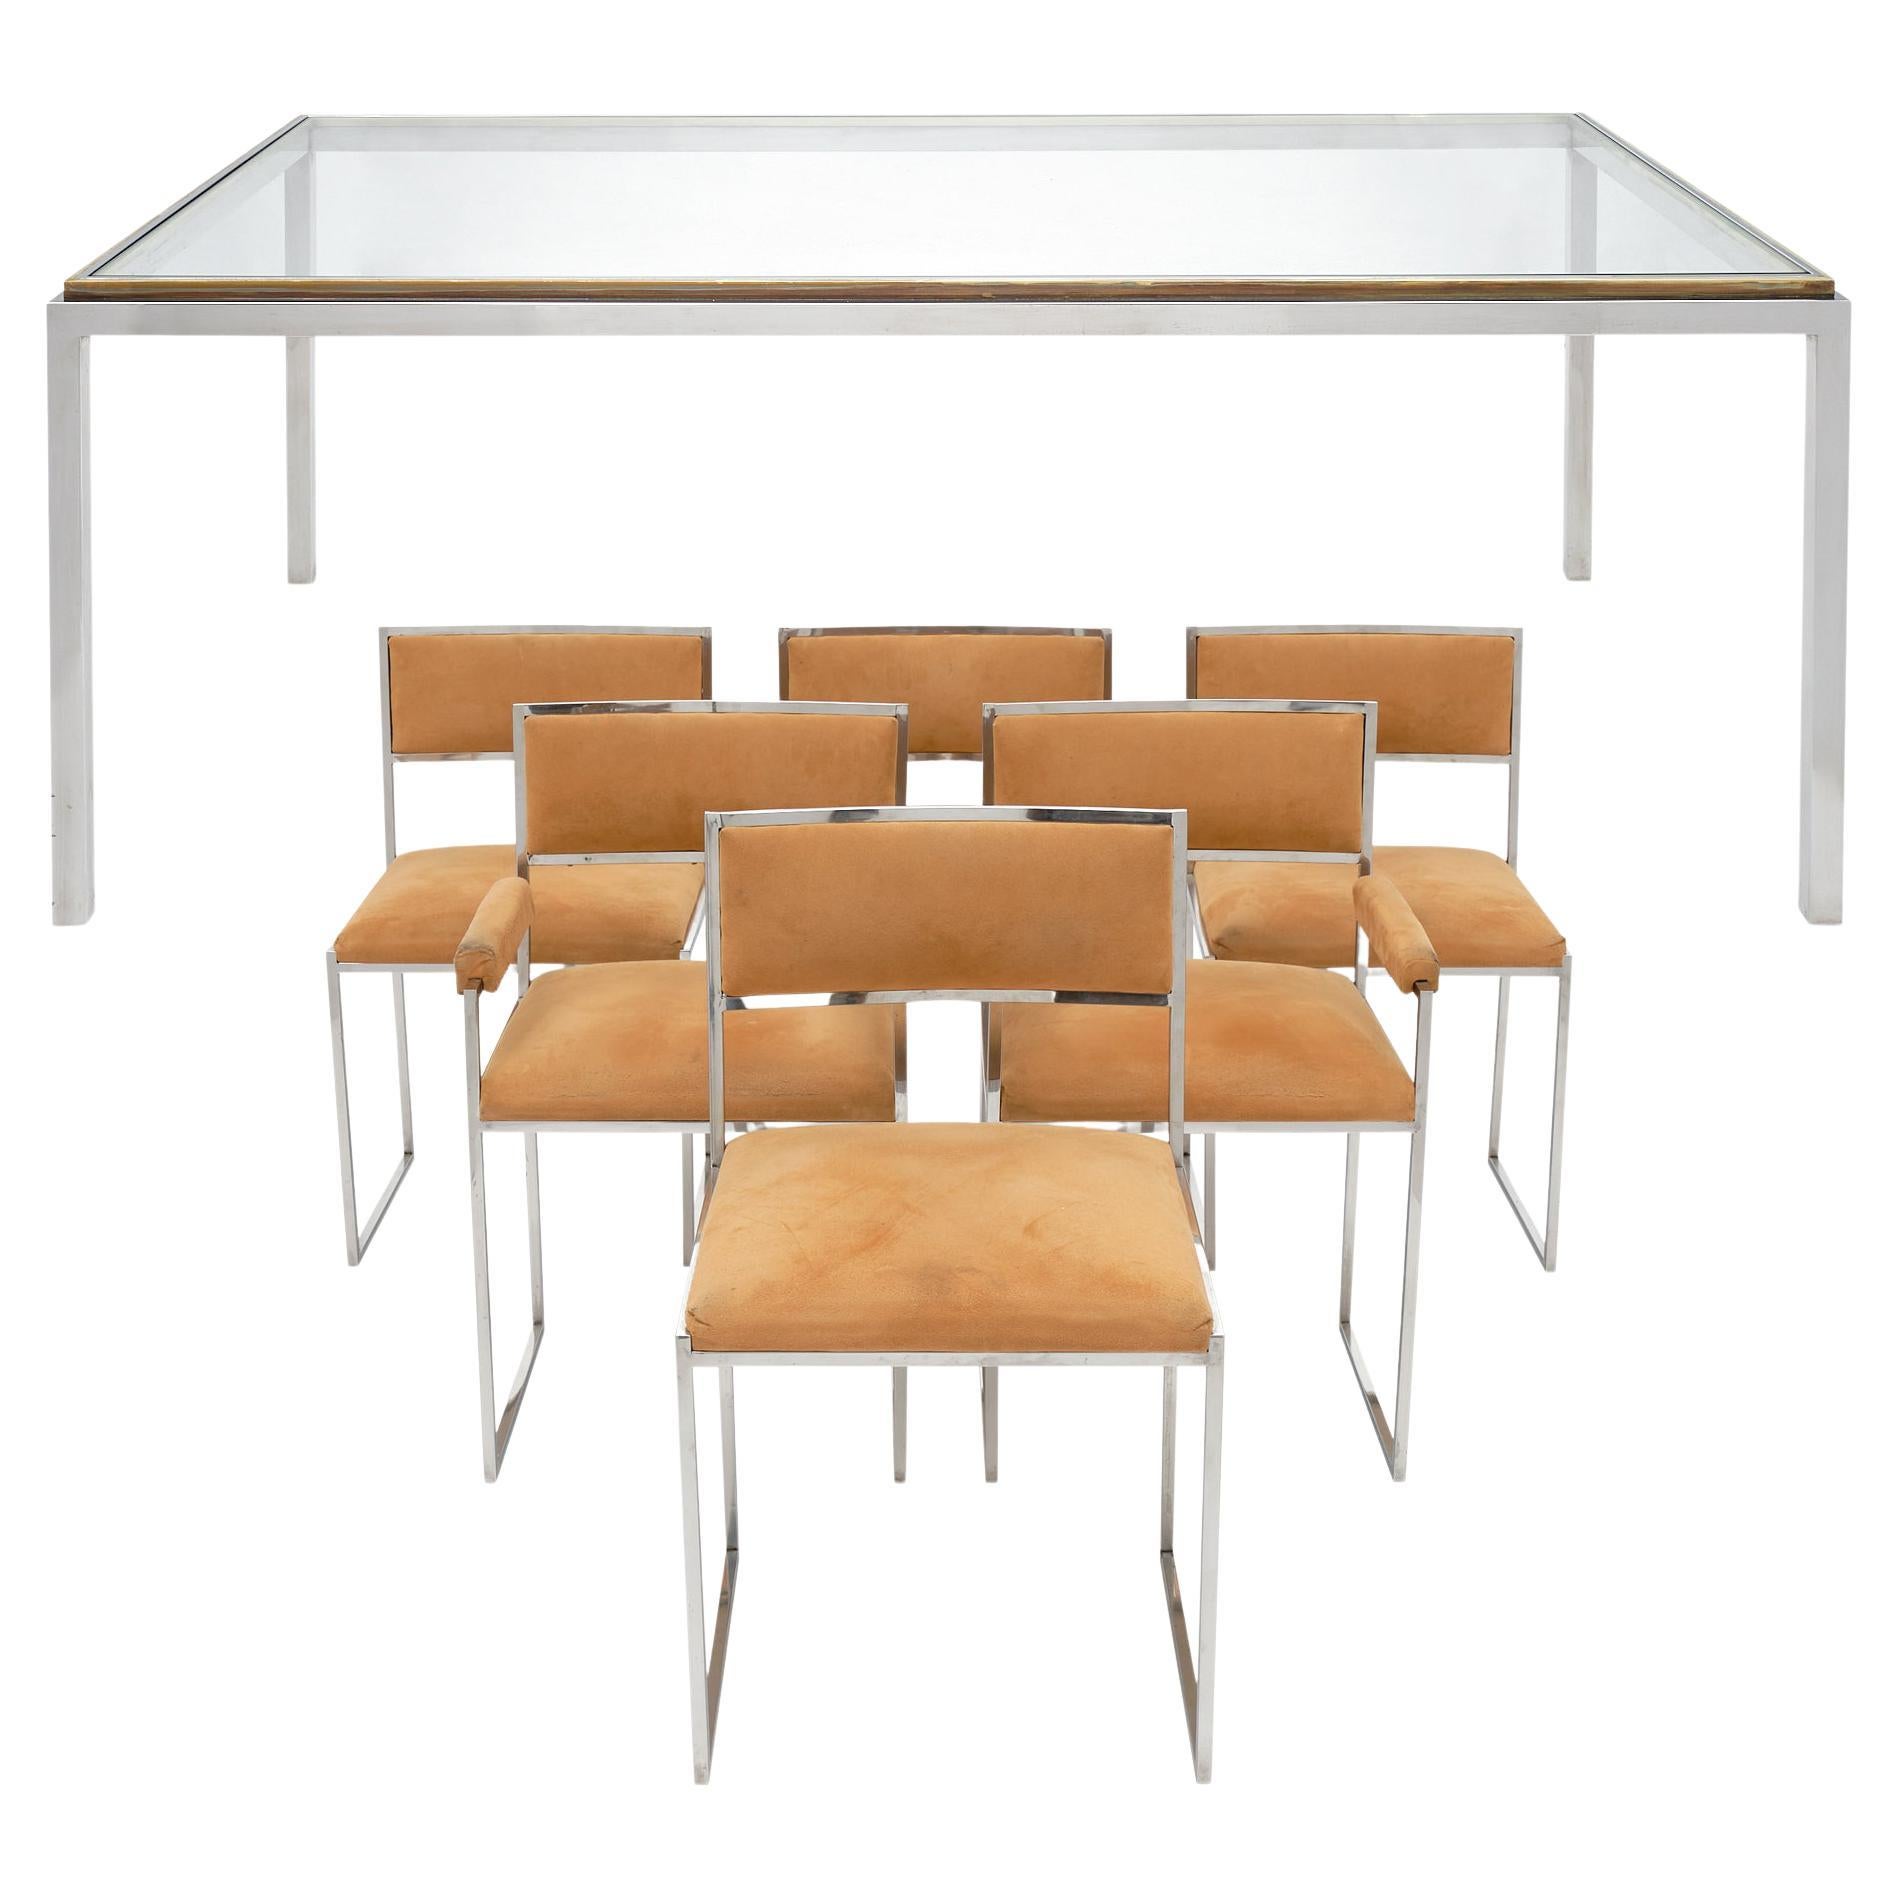 Romeo Rega Dining Table and Chairs For Sale